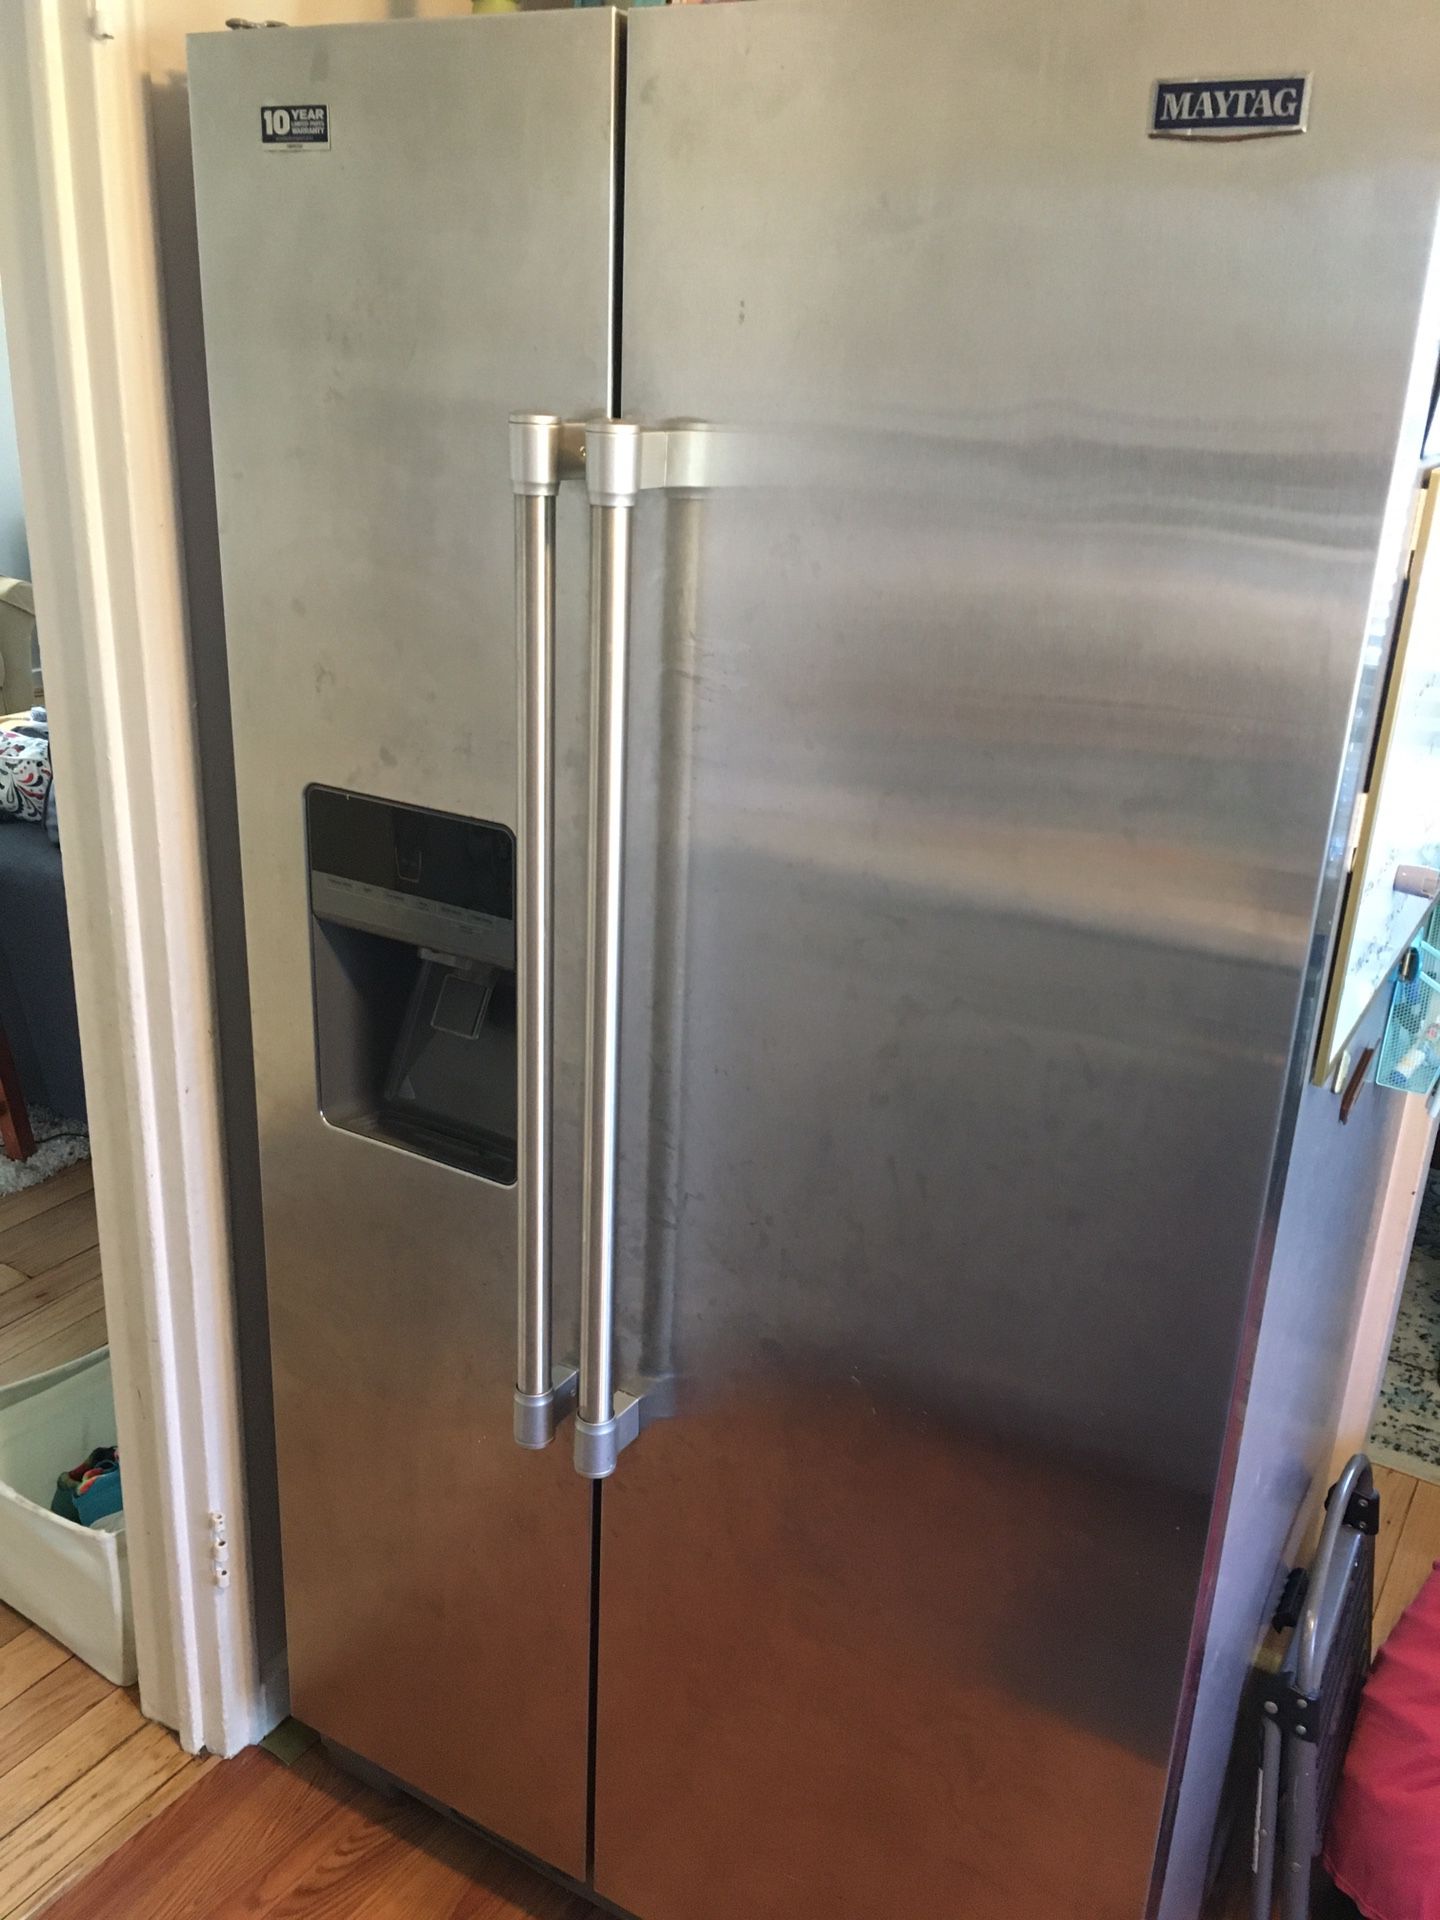 Maytag Stainless Steel Side By Side Refrigerator